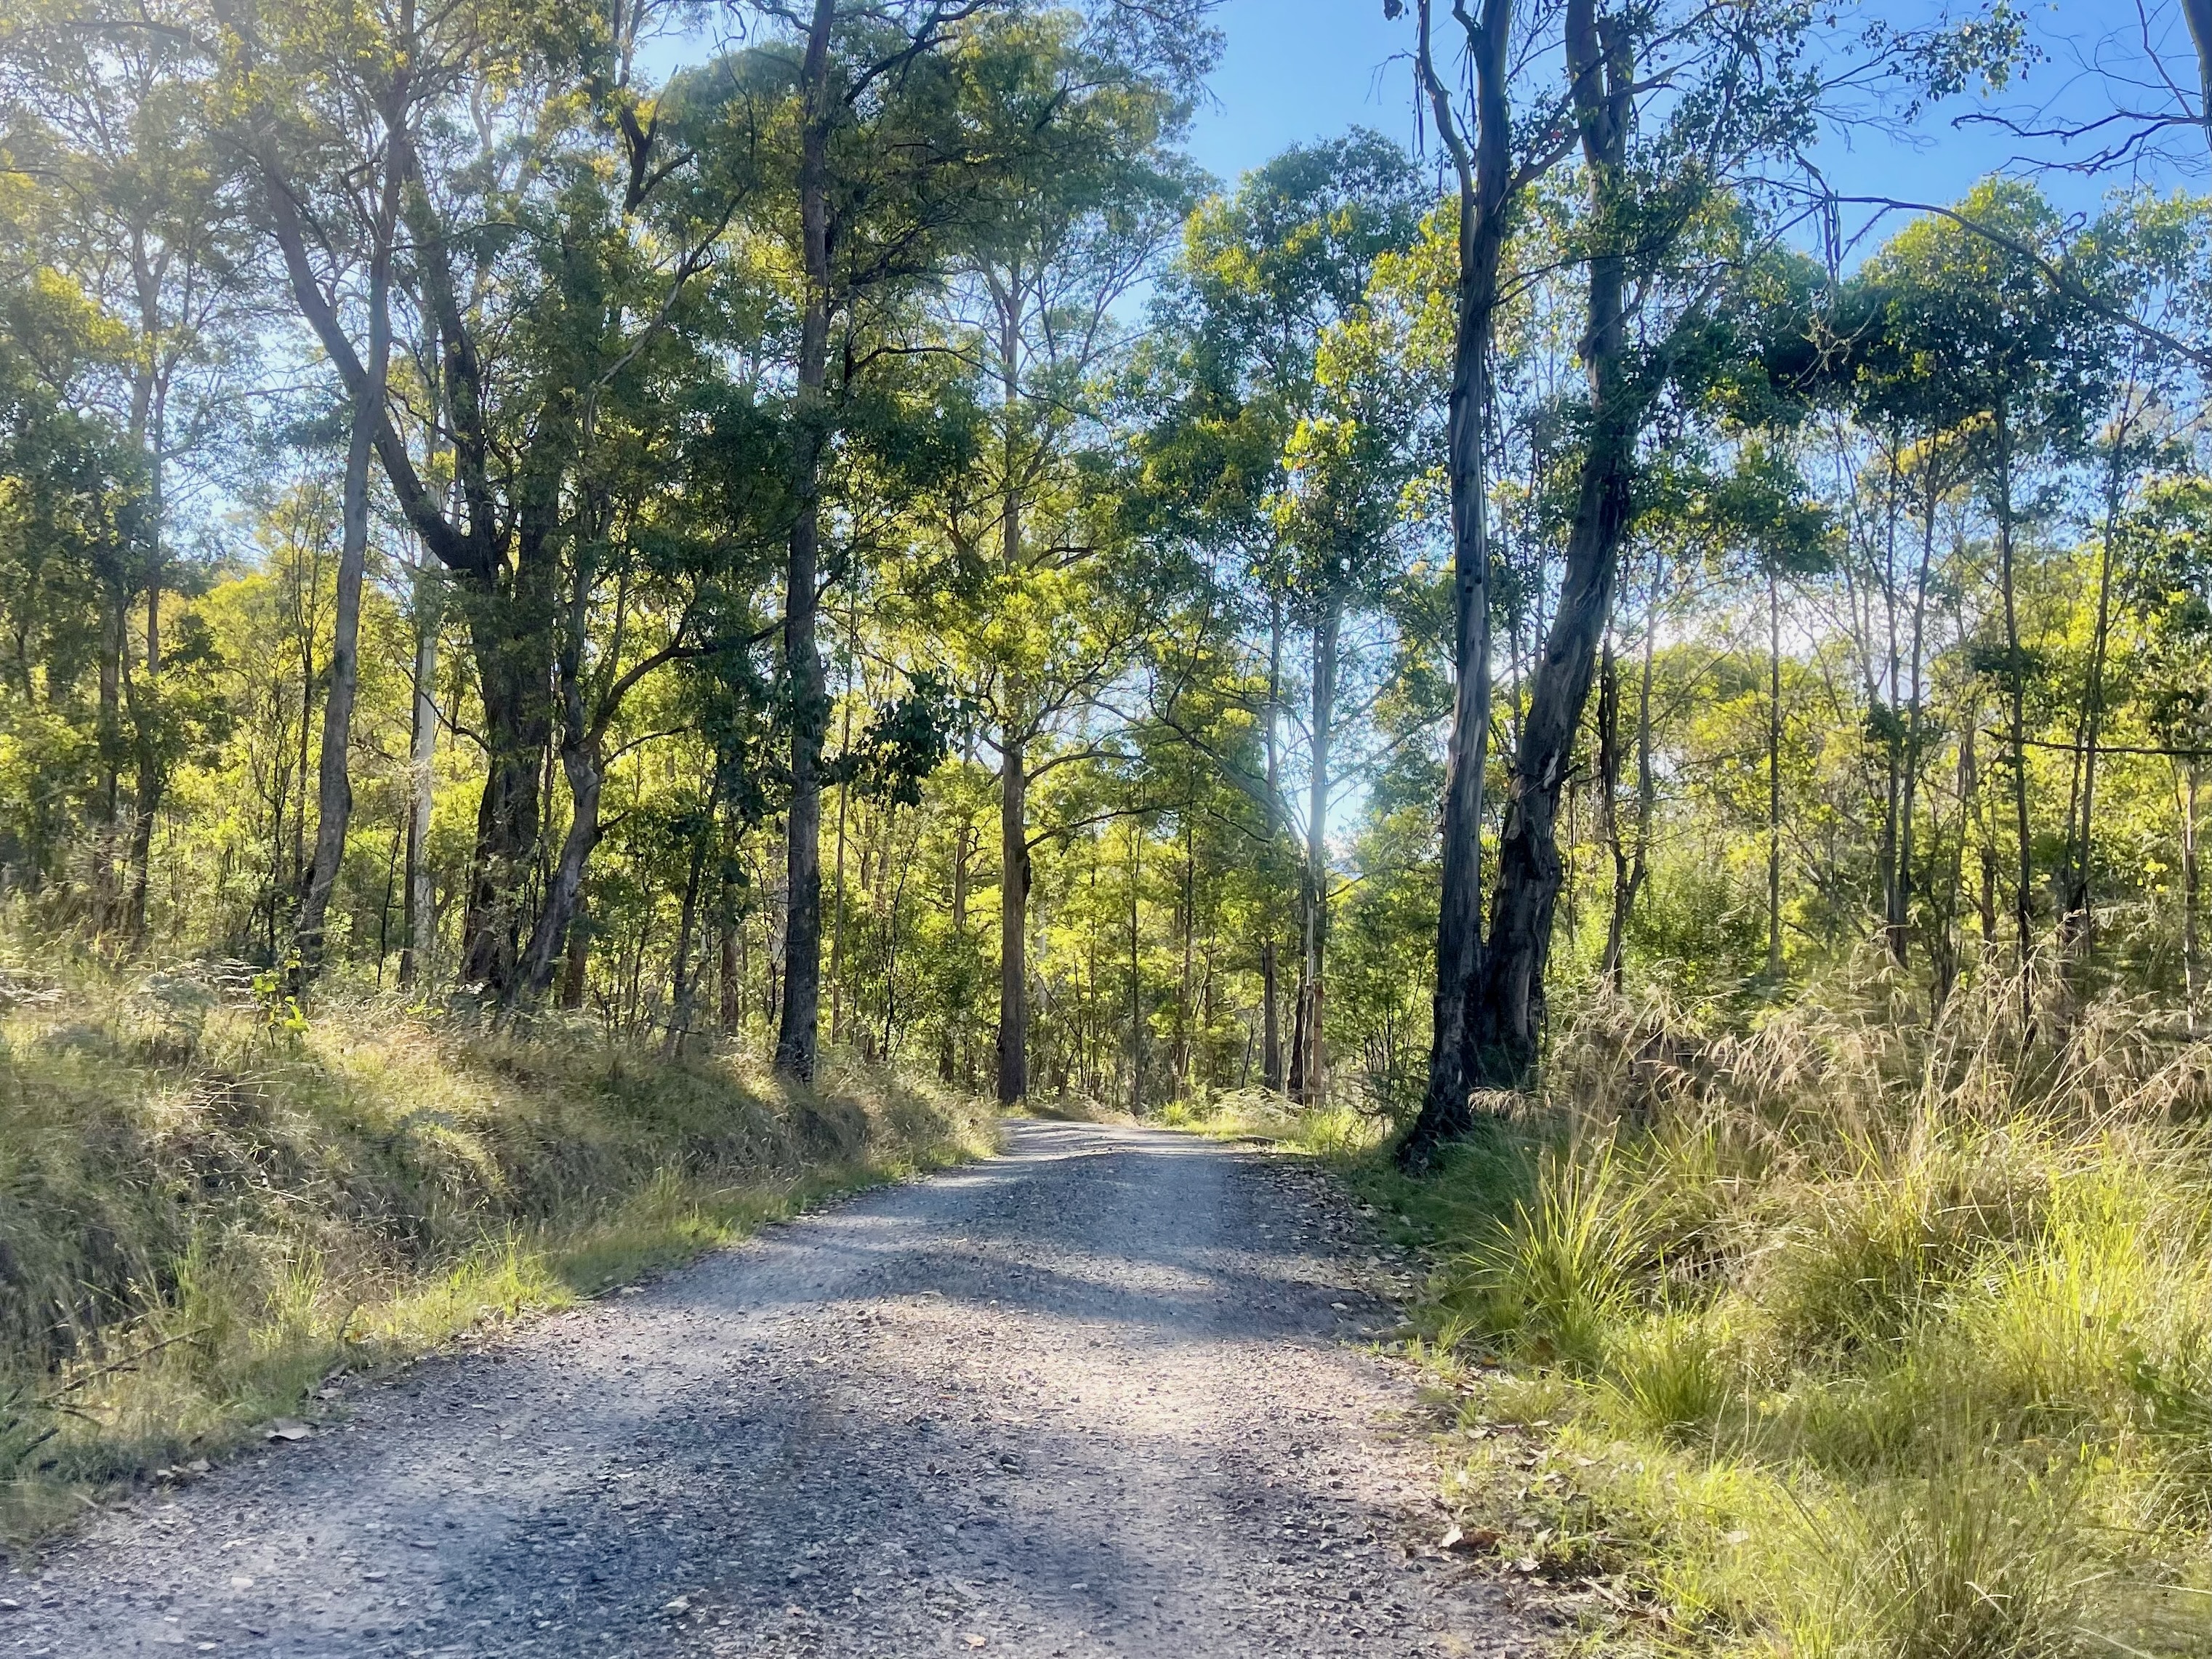 Gravel road rising up through native forest on a sunny day